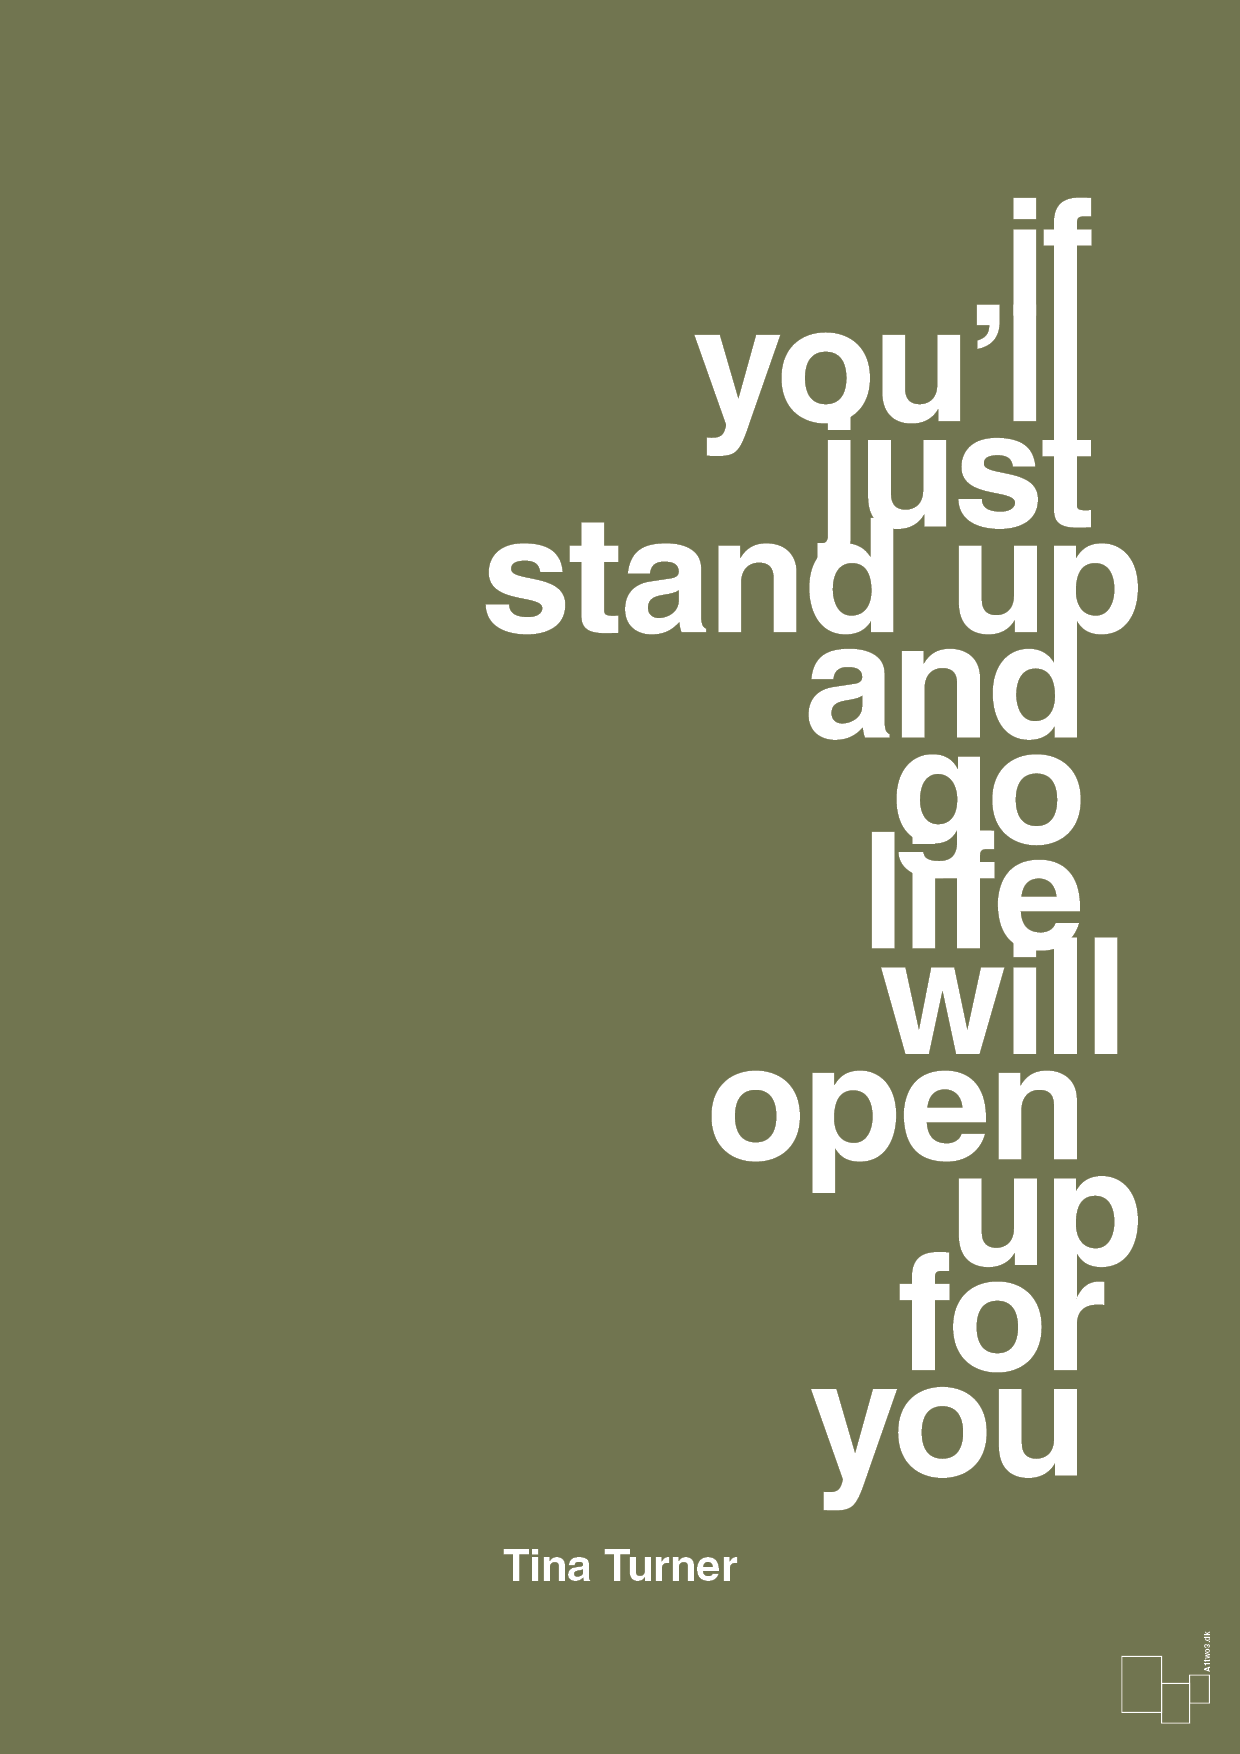 if you’ll just stand up and go life will open up for you - Plakat med Citater i Secret Meadow